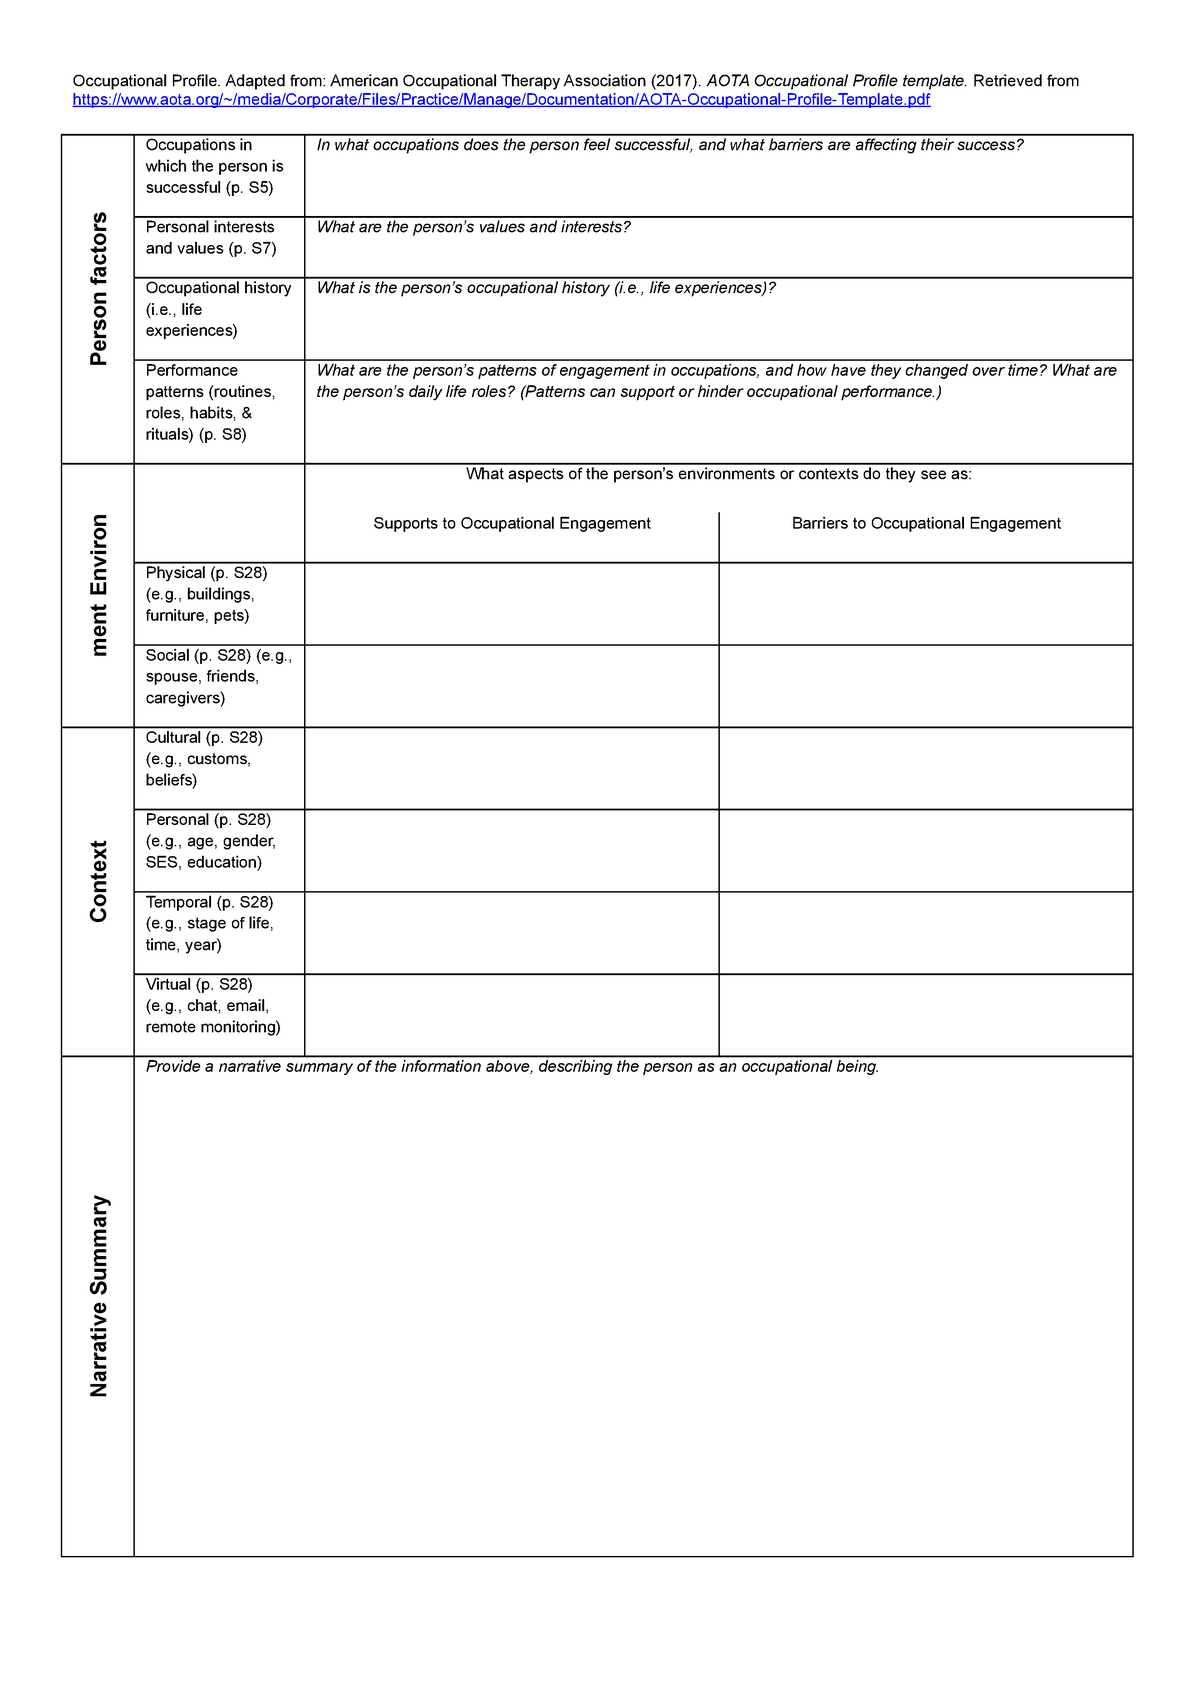 Occupational Profile Template Occupational Profile Adapted From American Occupational